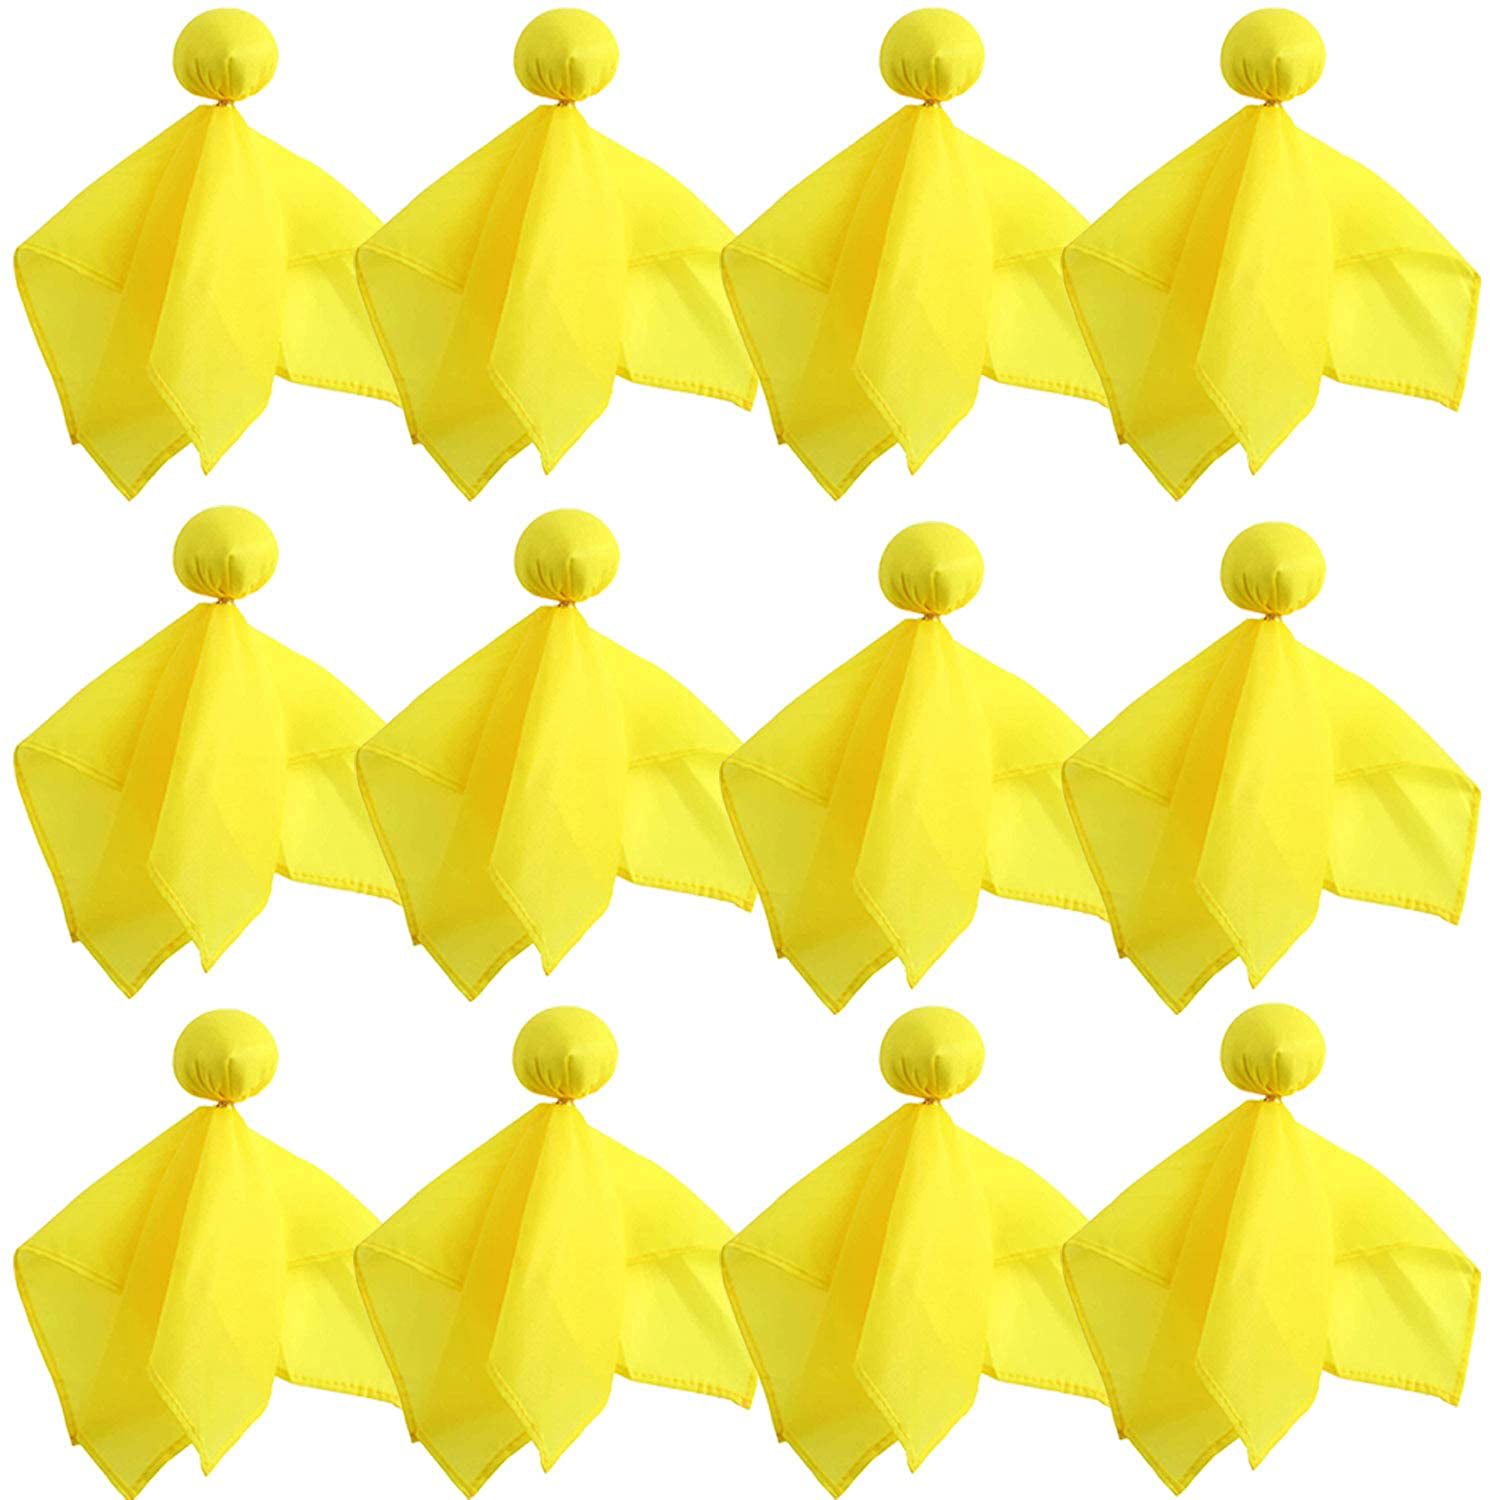 BKpearl 12 Pcs Football Penalty Flag Tossing Flags Sports Fan Set Penalty Flag Party Accessory 